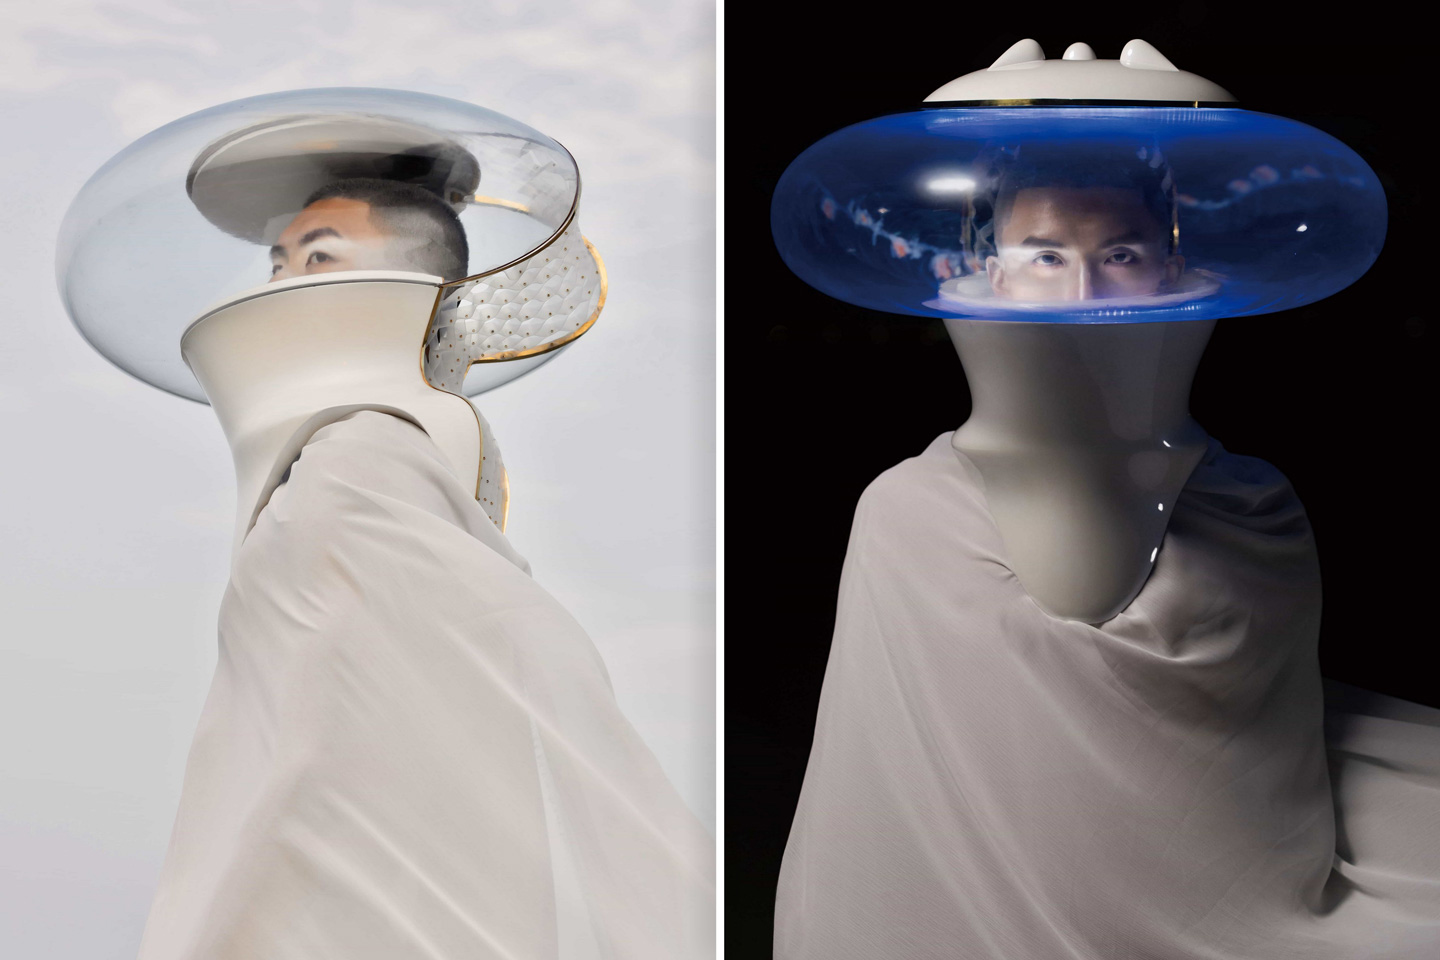 #This human suit is designed for a speculative future where our atmosphere is no longer habitable